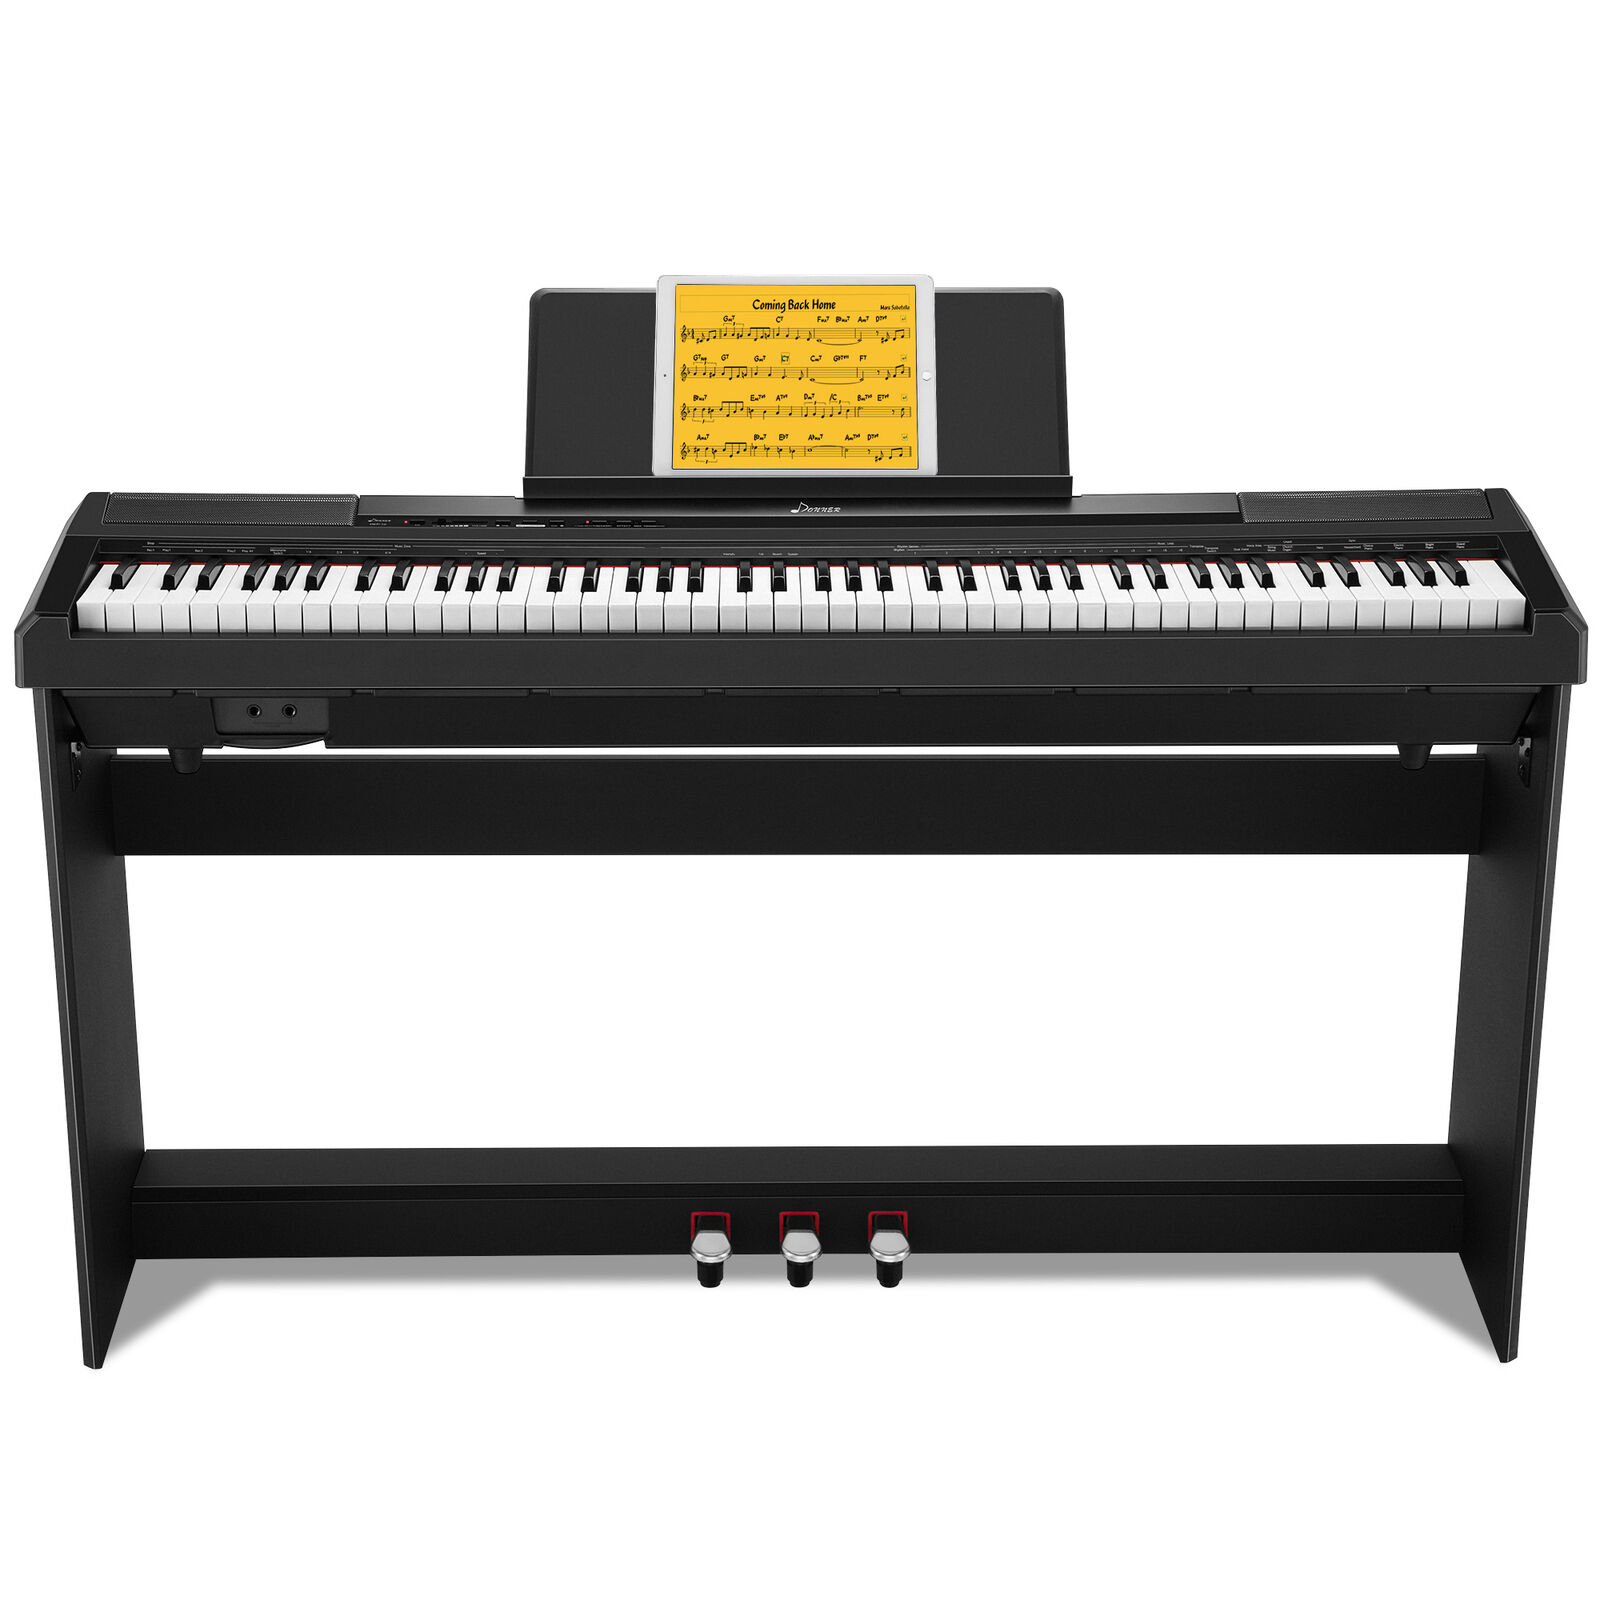 Donner DEP-10 Digital Piano 88-Key Semi Weighted Electric Keyboard w/ Stand